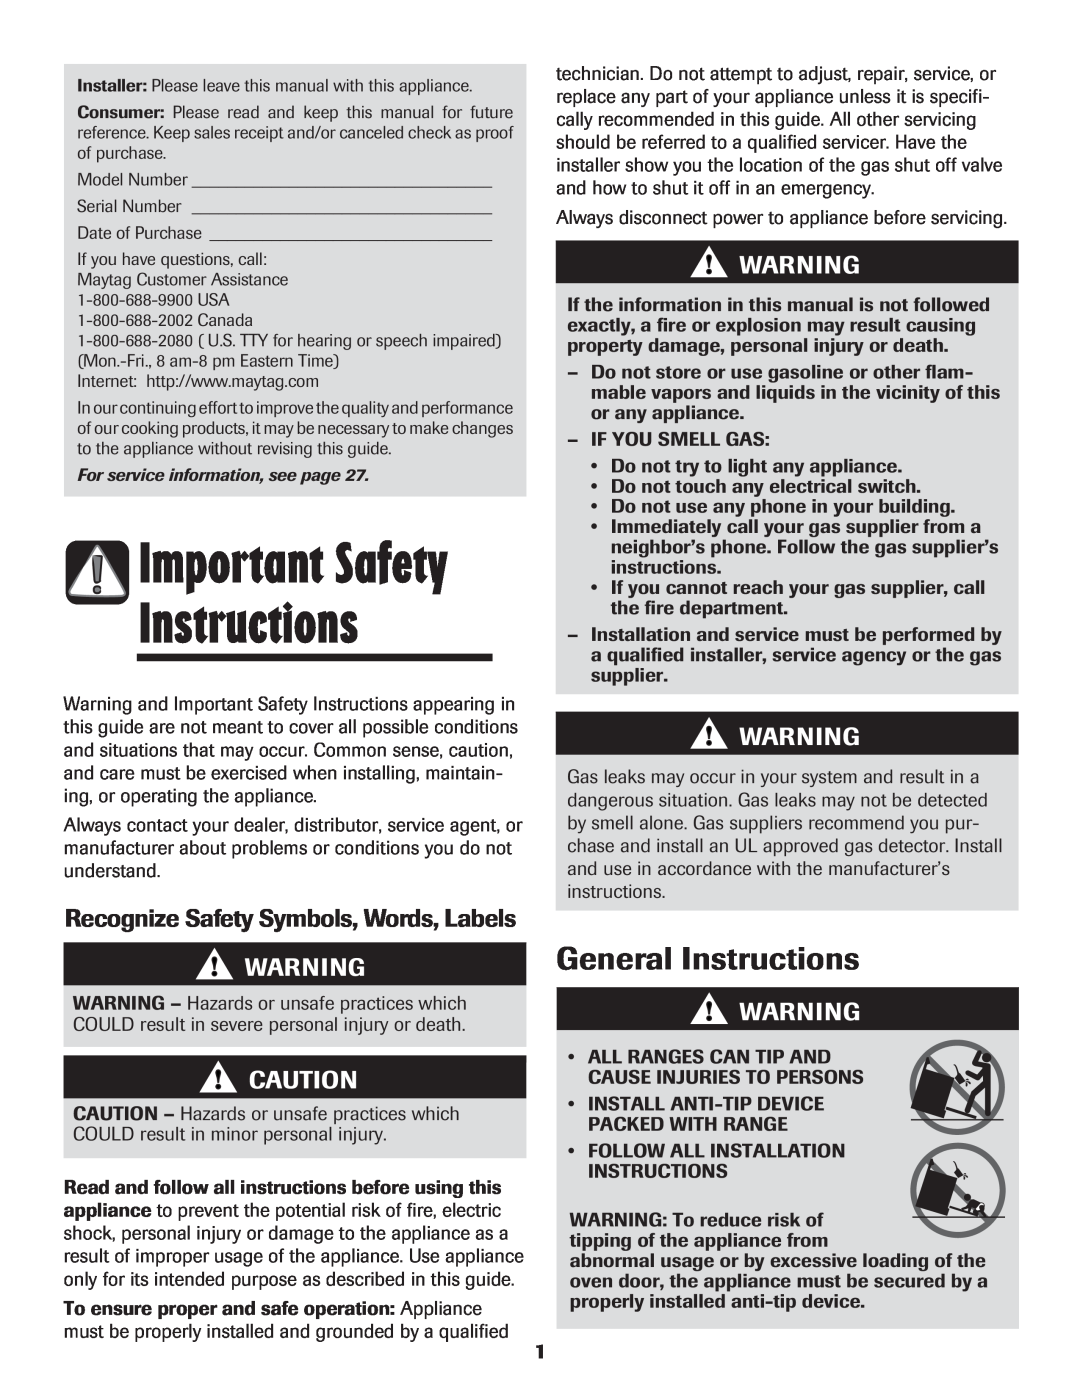 LG Electronics 800 Important Safety, General Instructions, Recognize Safety Symbols, Words, Labels 